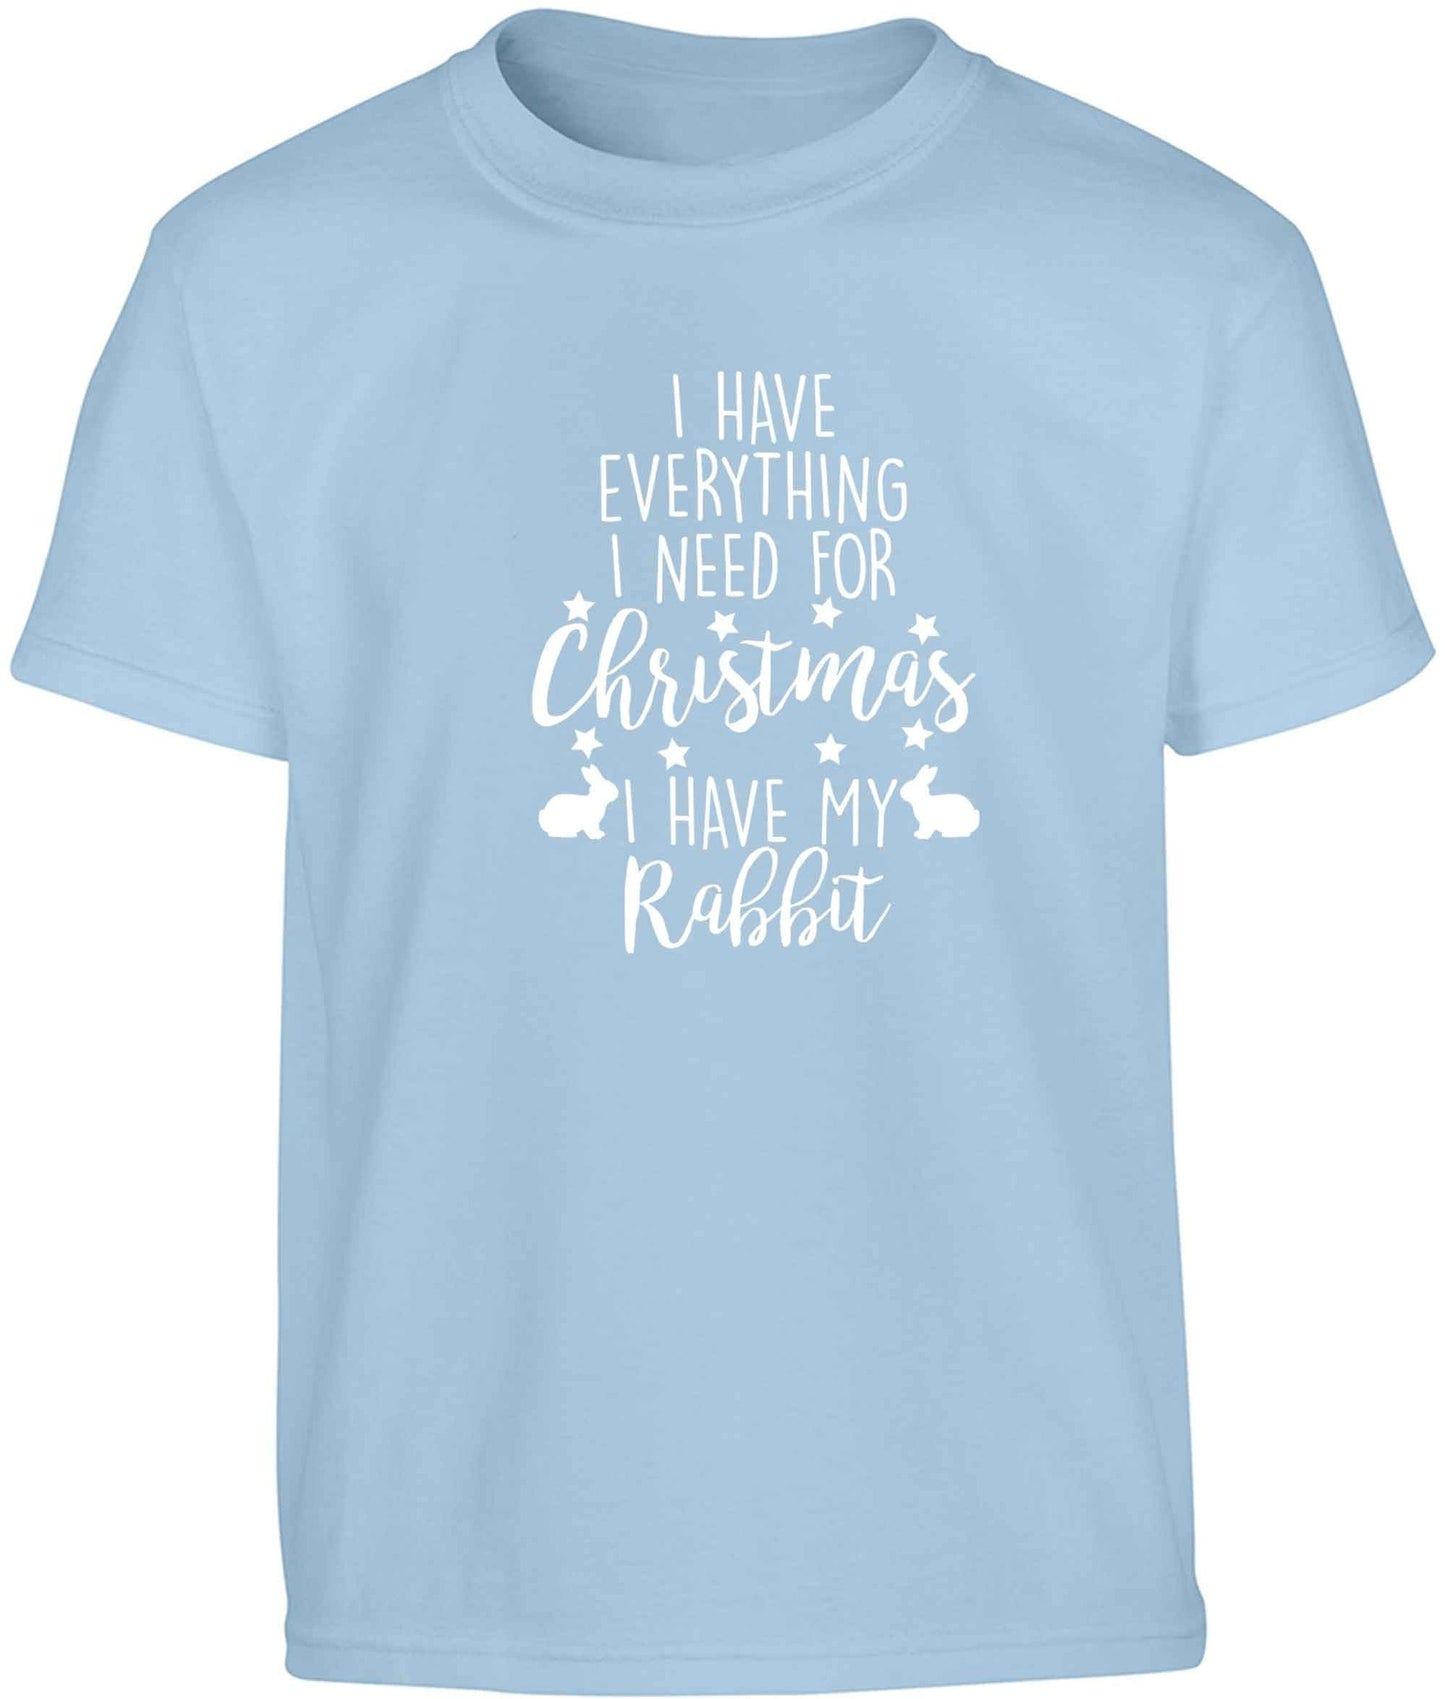 I have everything I need for Christmas I have my rabbit Children's light blue Tshirt 12-13 Years